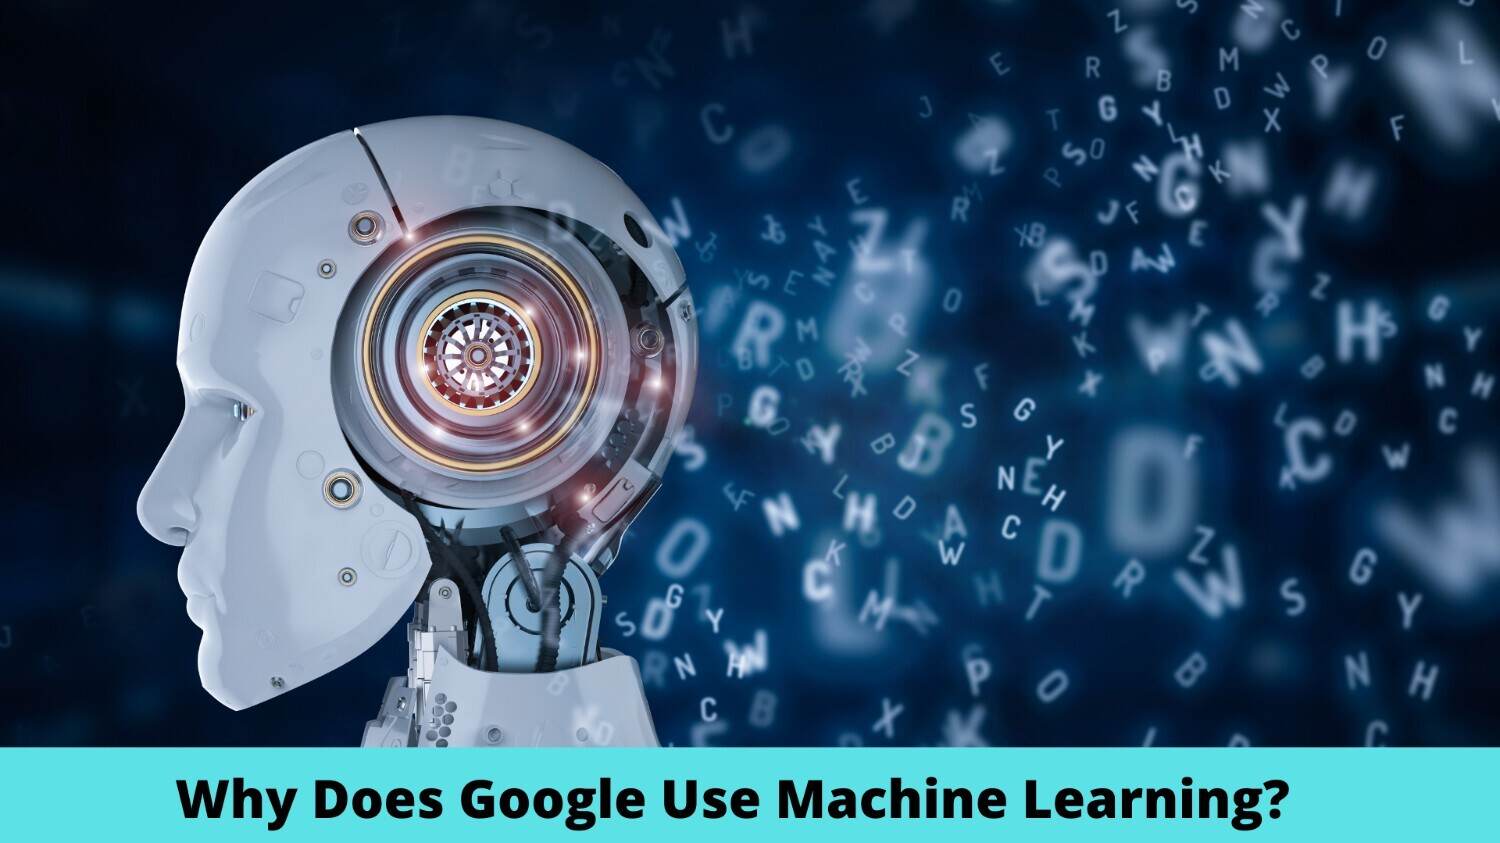 Why Does Google Use Machine Learning?